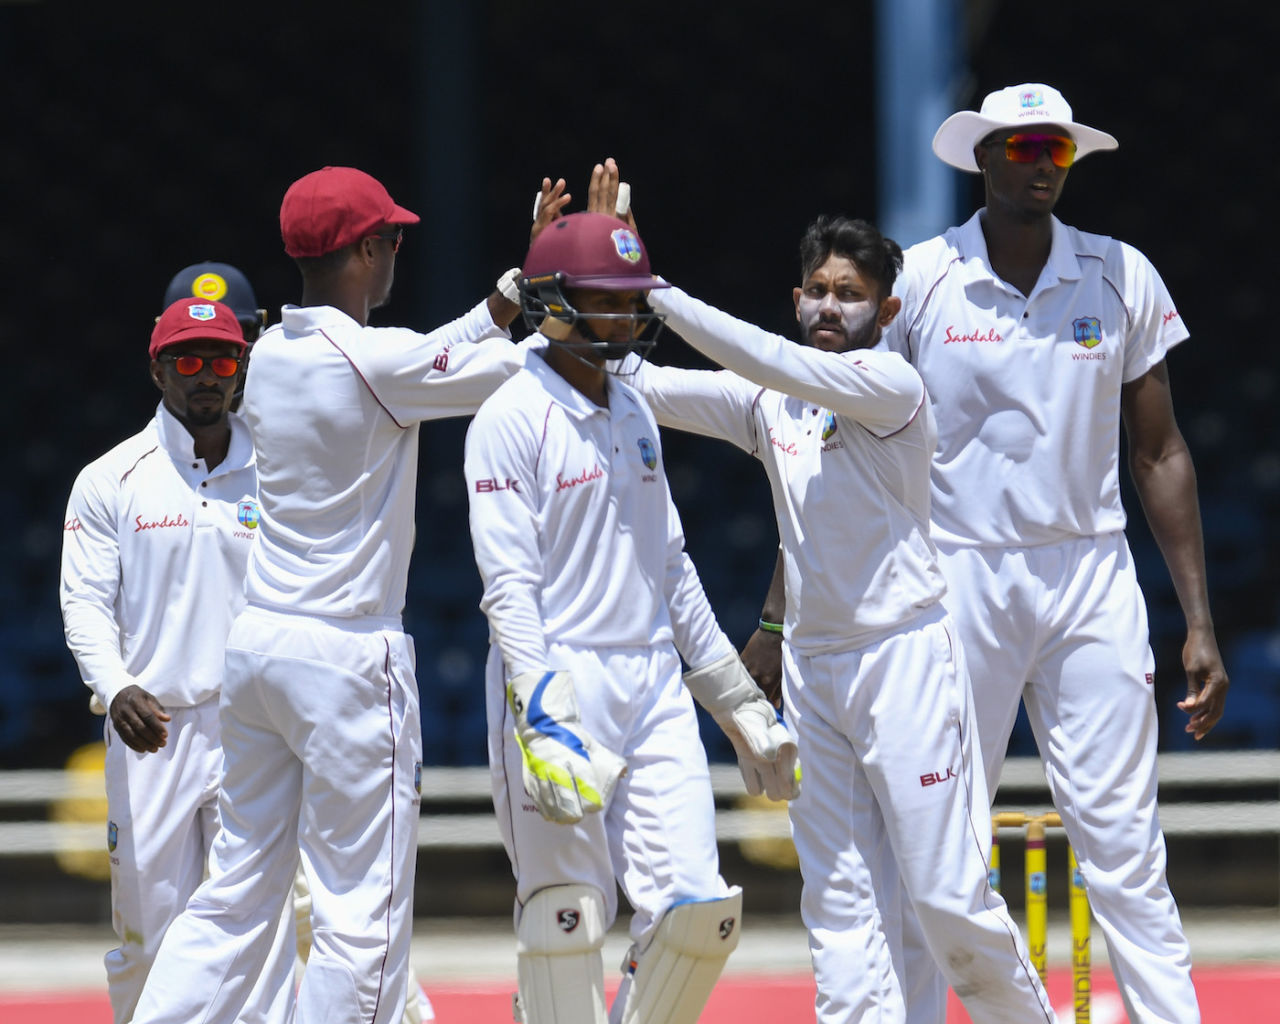 Devendra Bishoo is congratulated after taking a wicket, West Indies v Sri Lanka, 1st Test, Port of Spain, 5th day, June 10, 2018